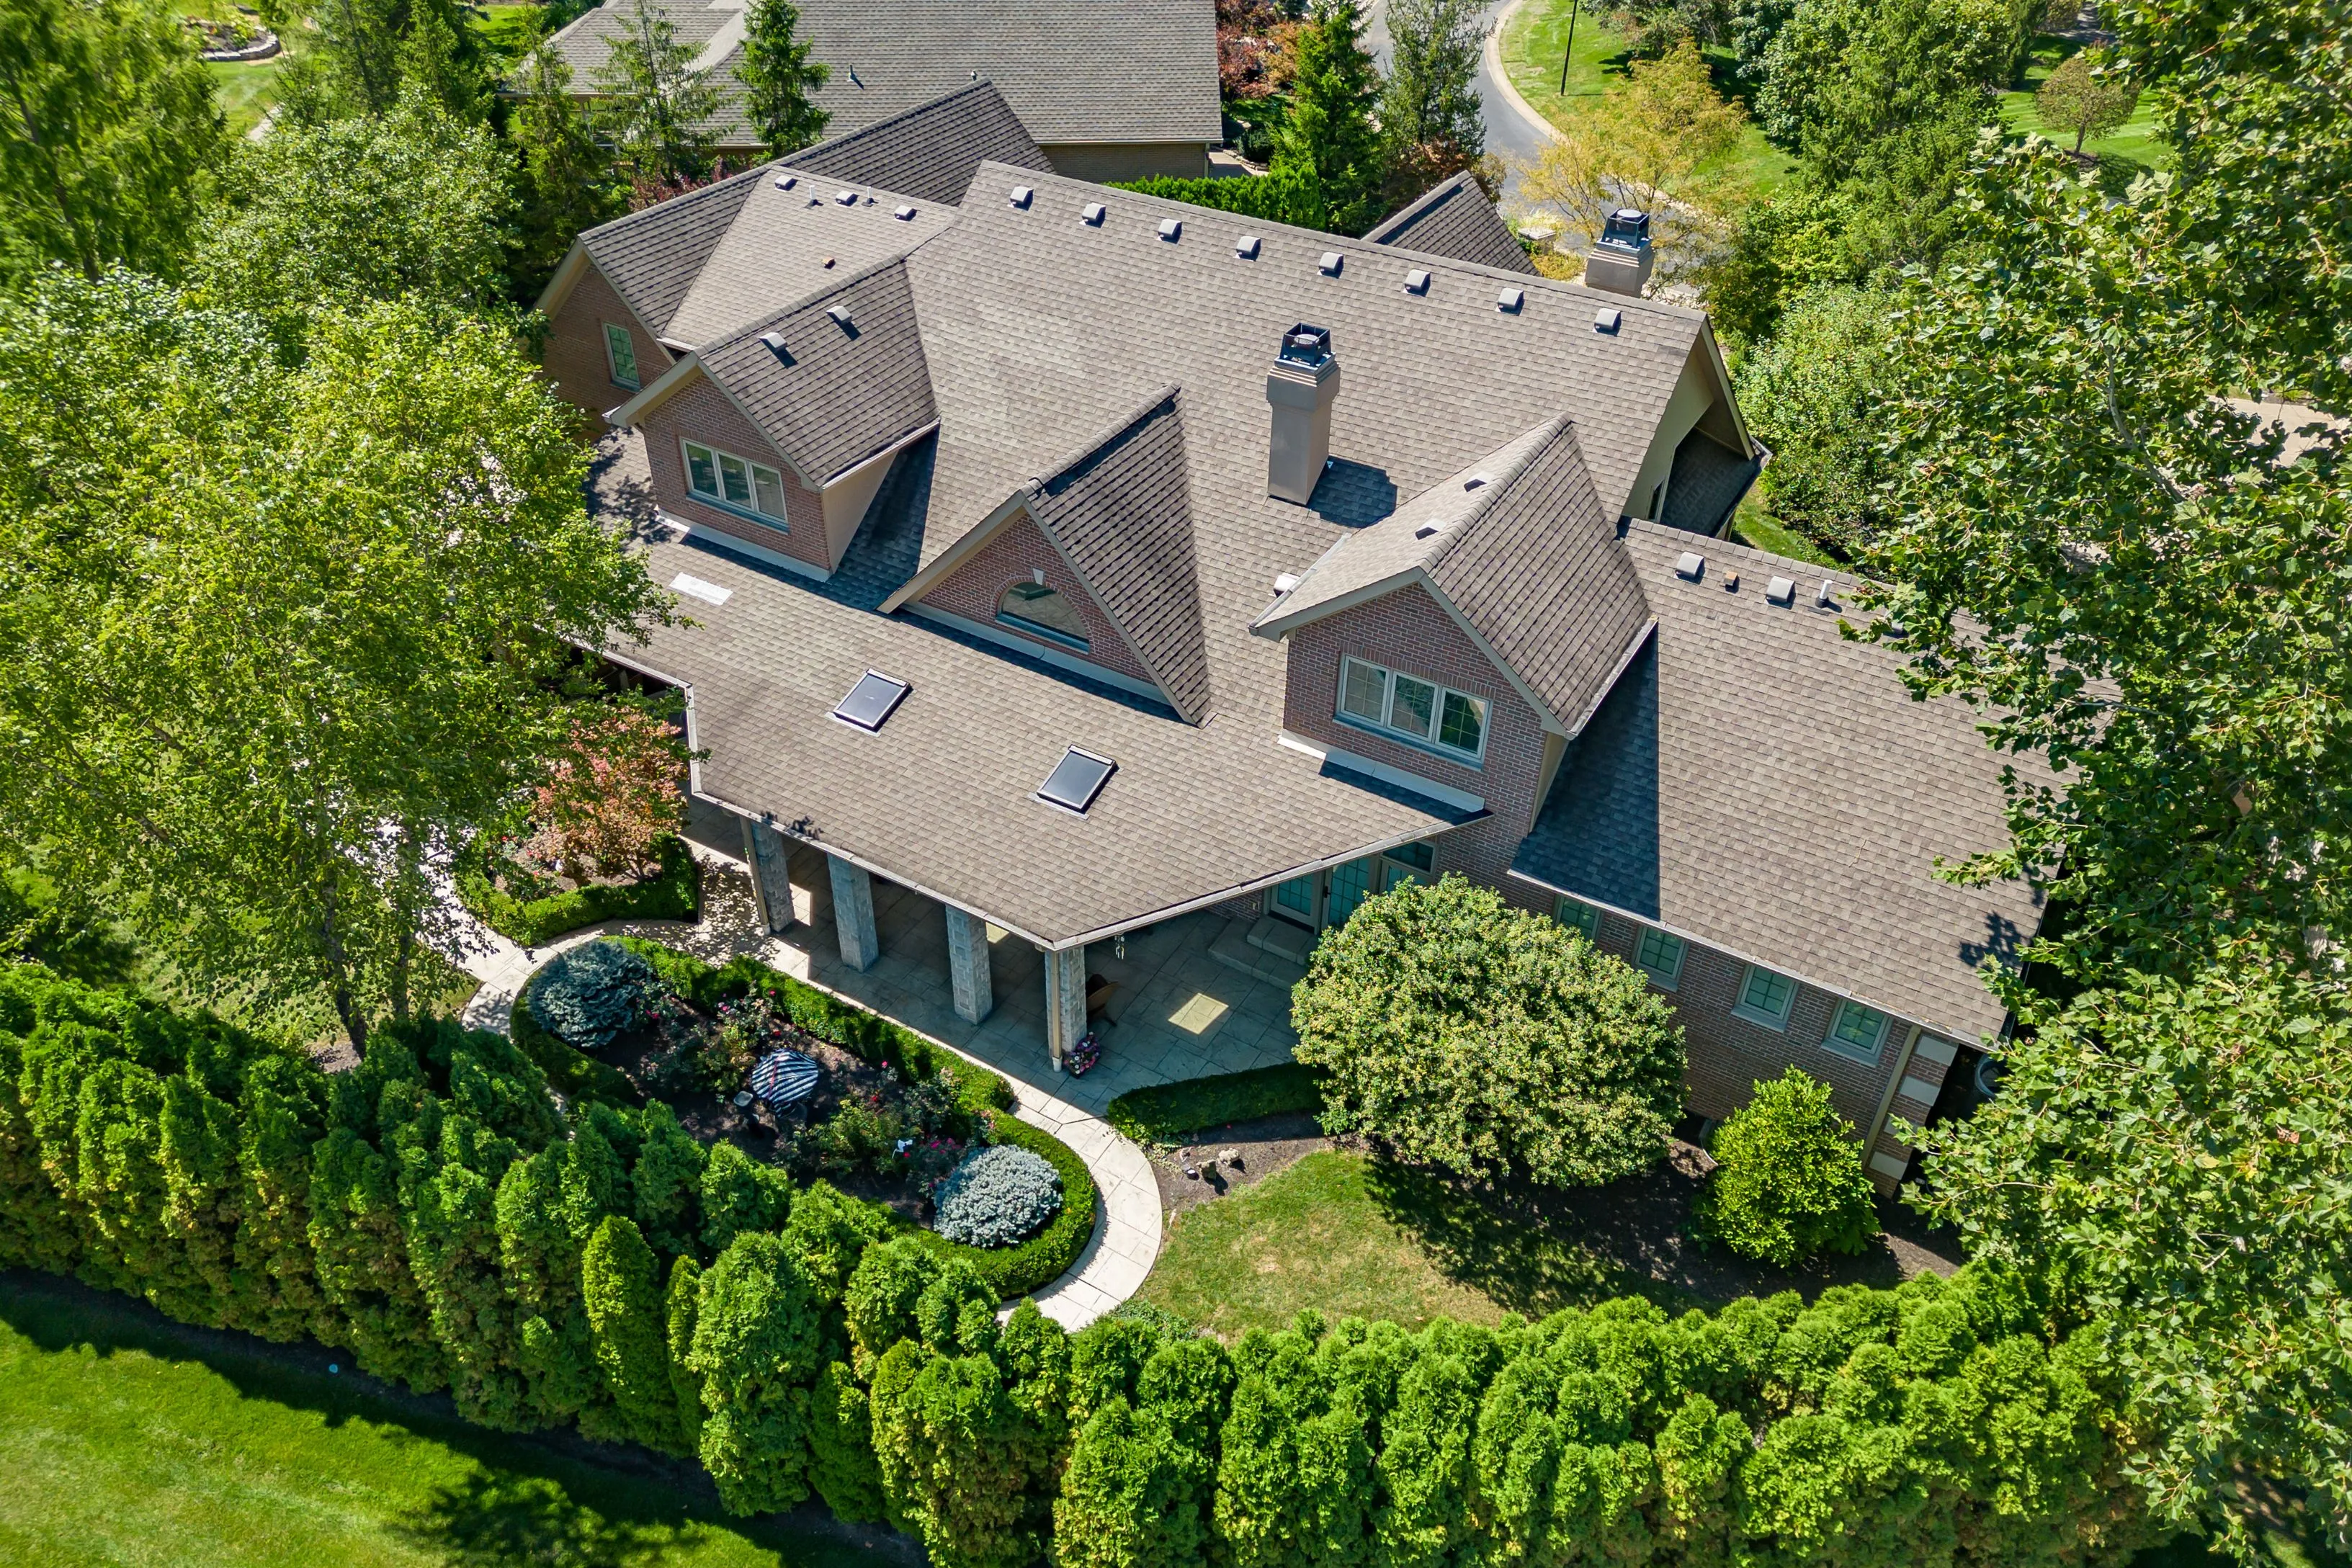 Aerial view of a large suburban house with a multi-gabled roof, surrounded by a landscaped garden and a hedge perimeter.